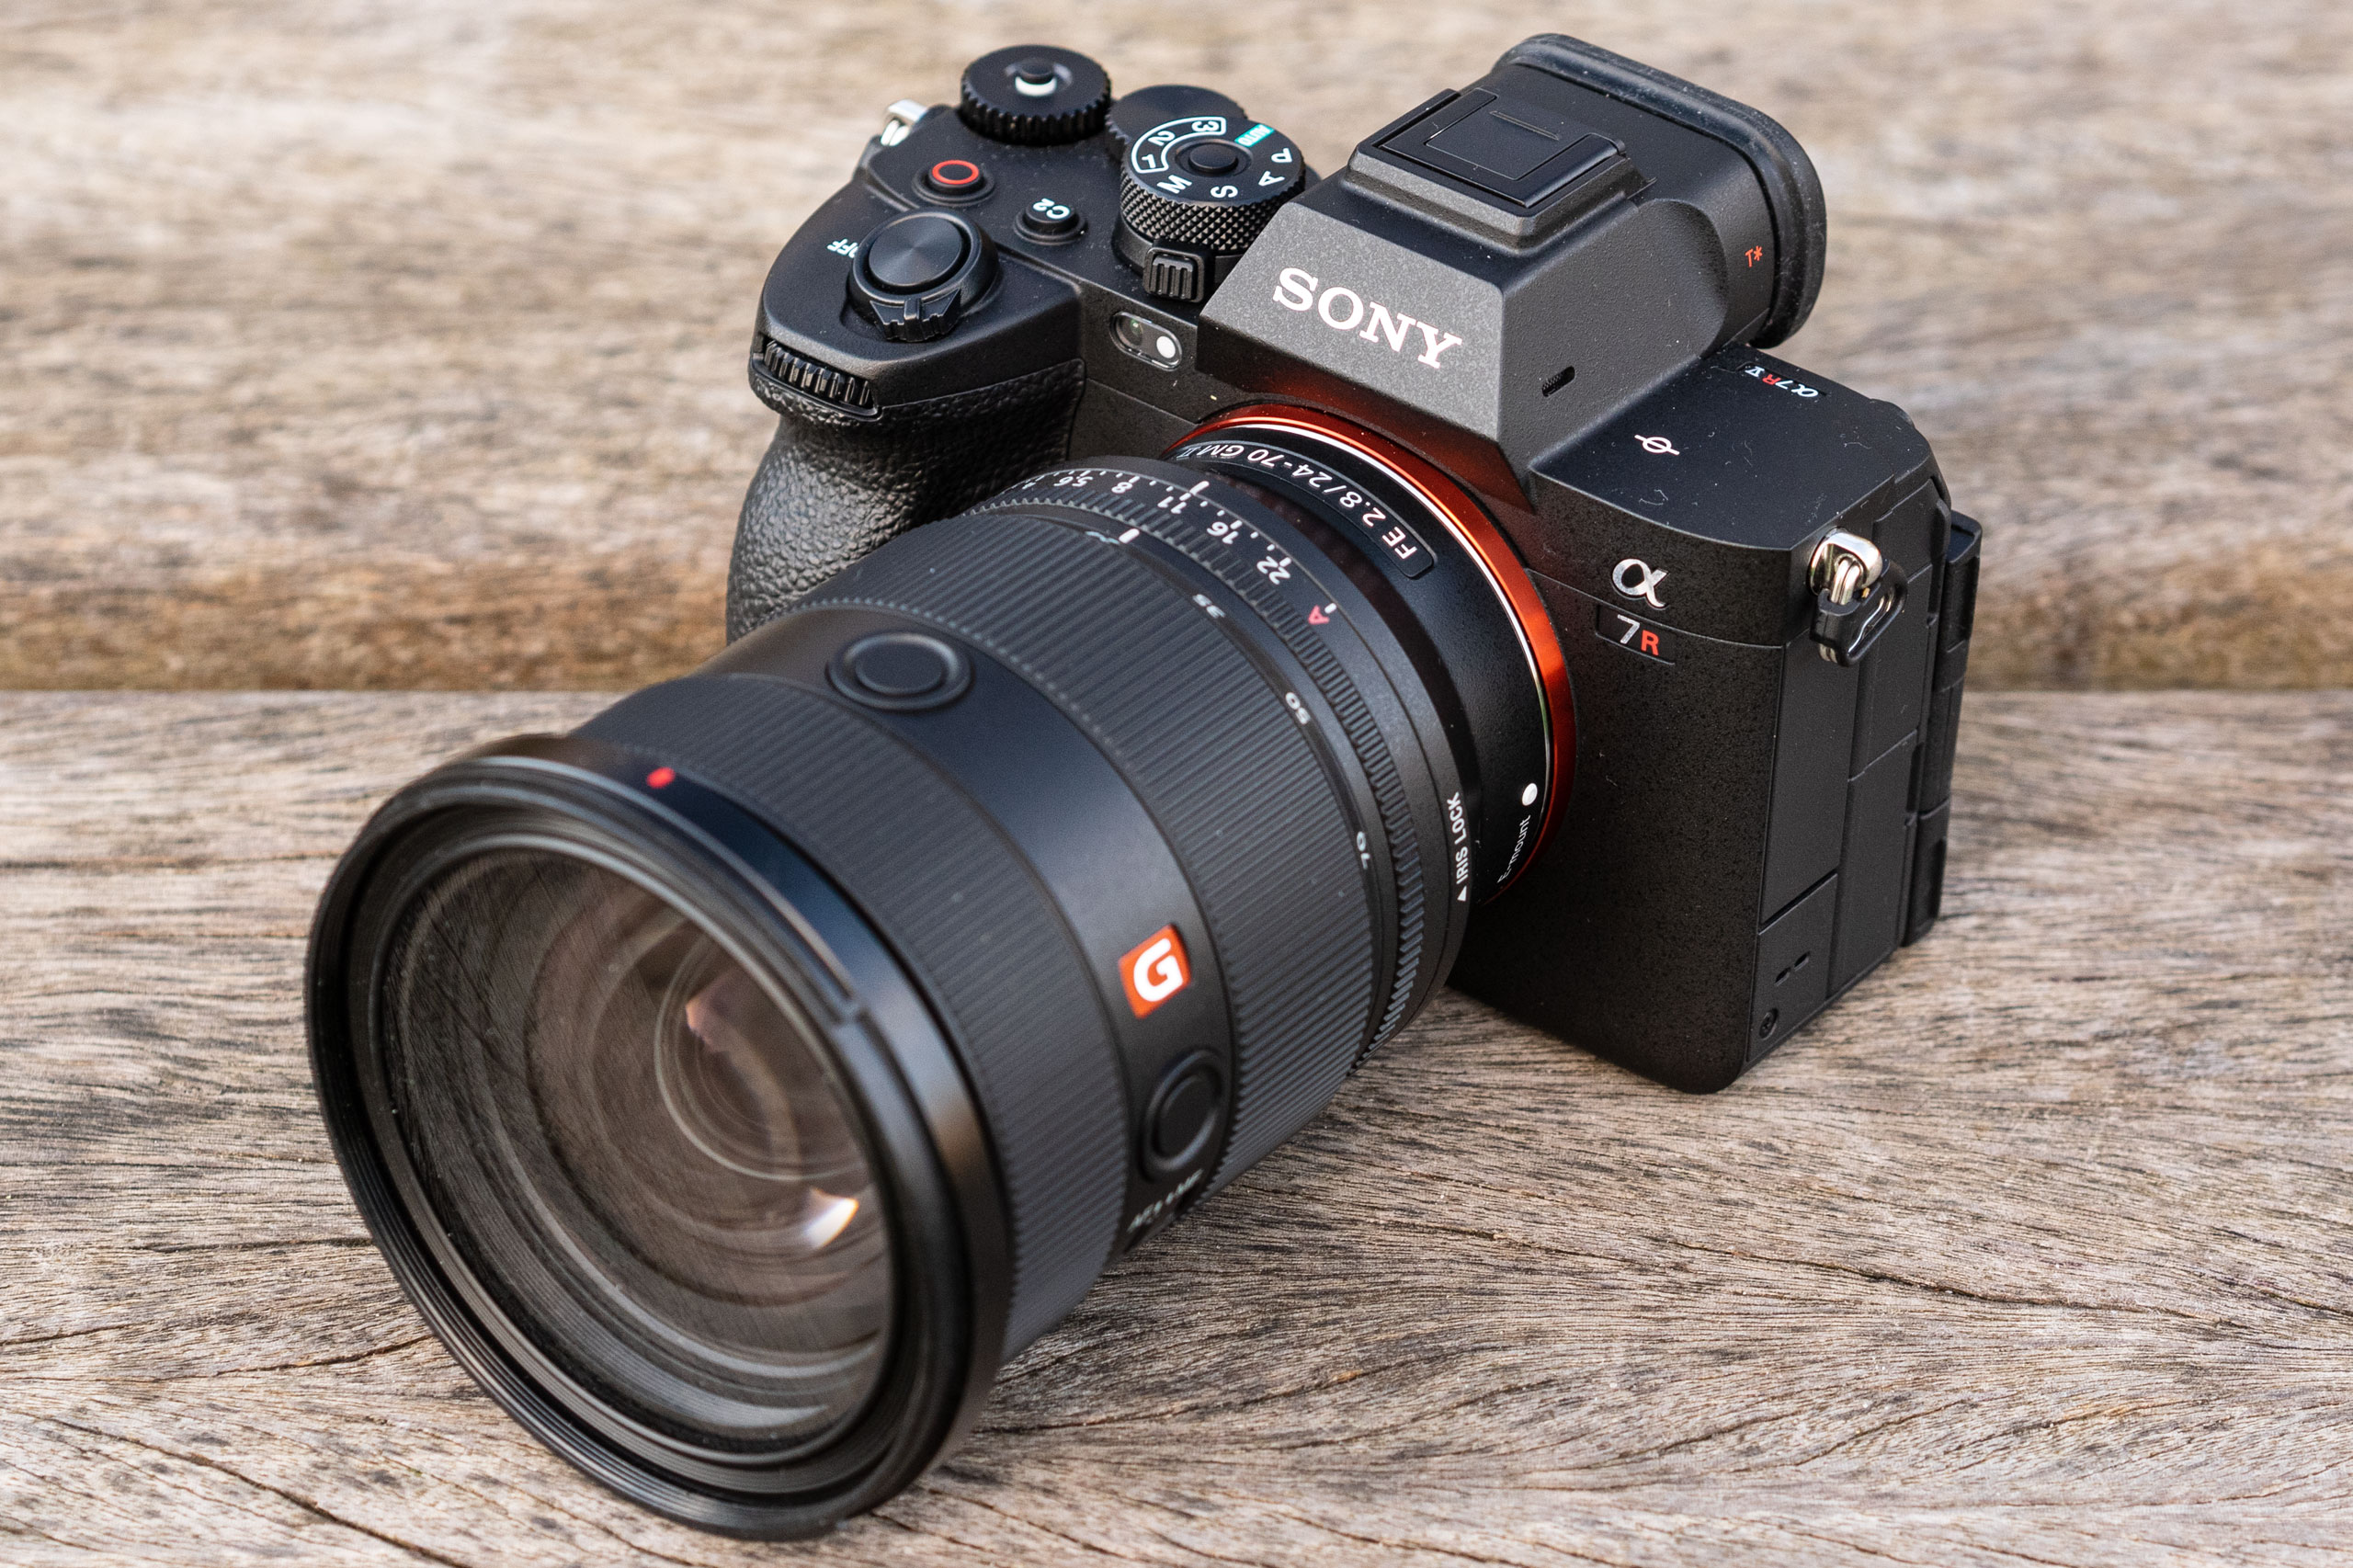 2 Years with the Sony A7R III - Was it Worth Switching from Canon DSLR ?